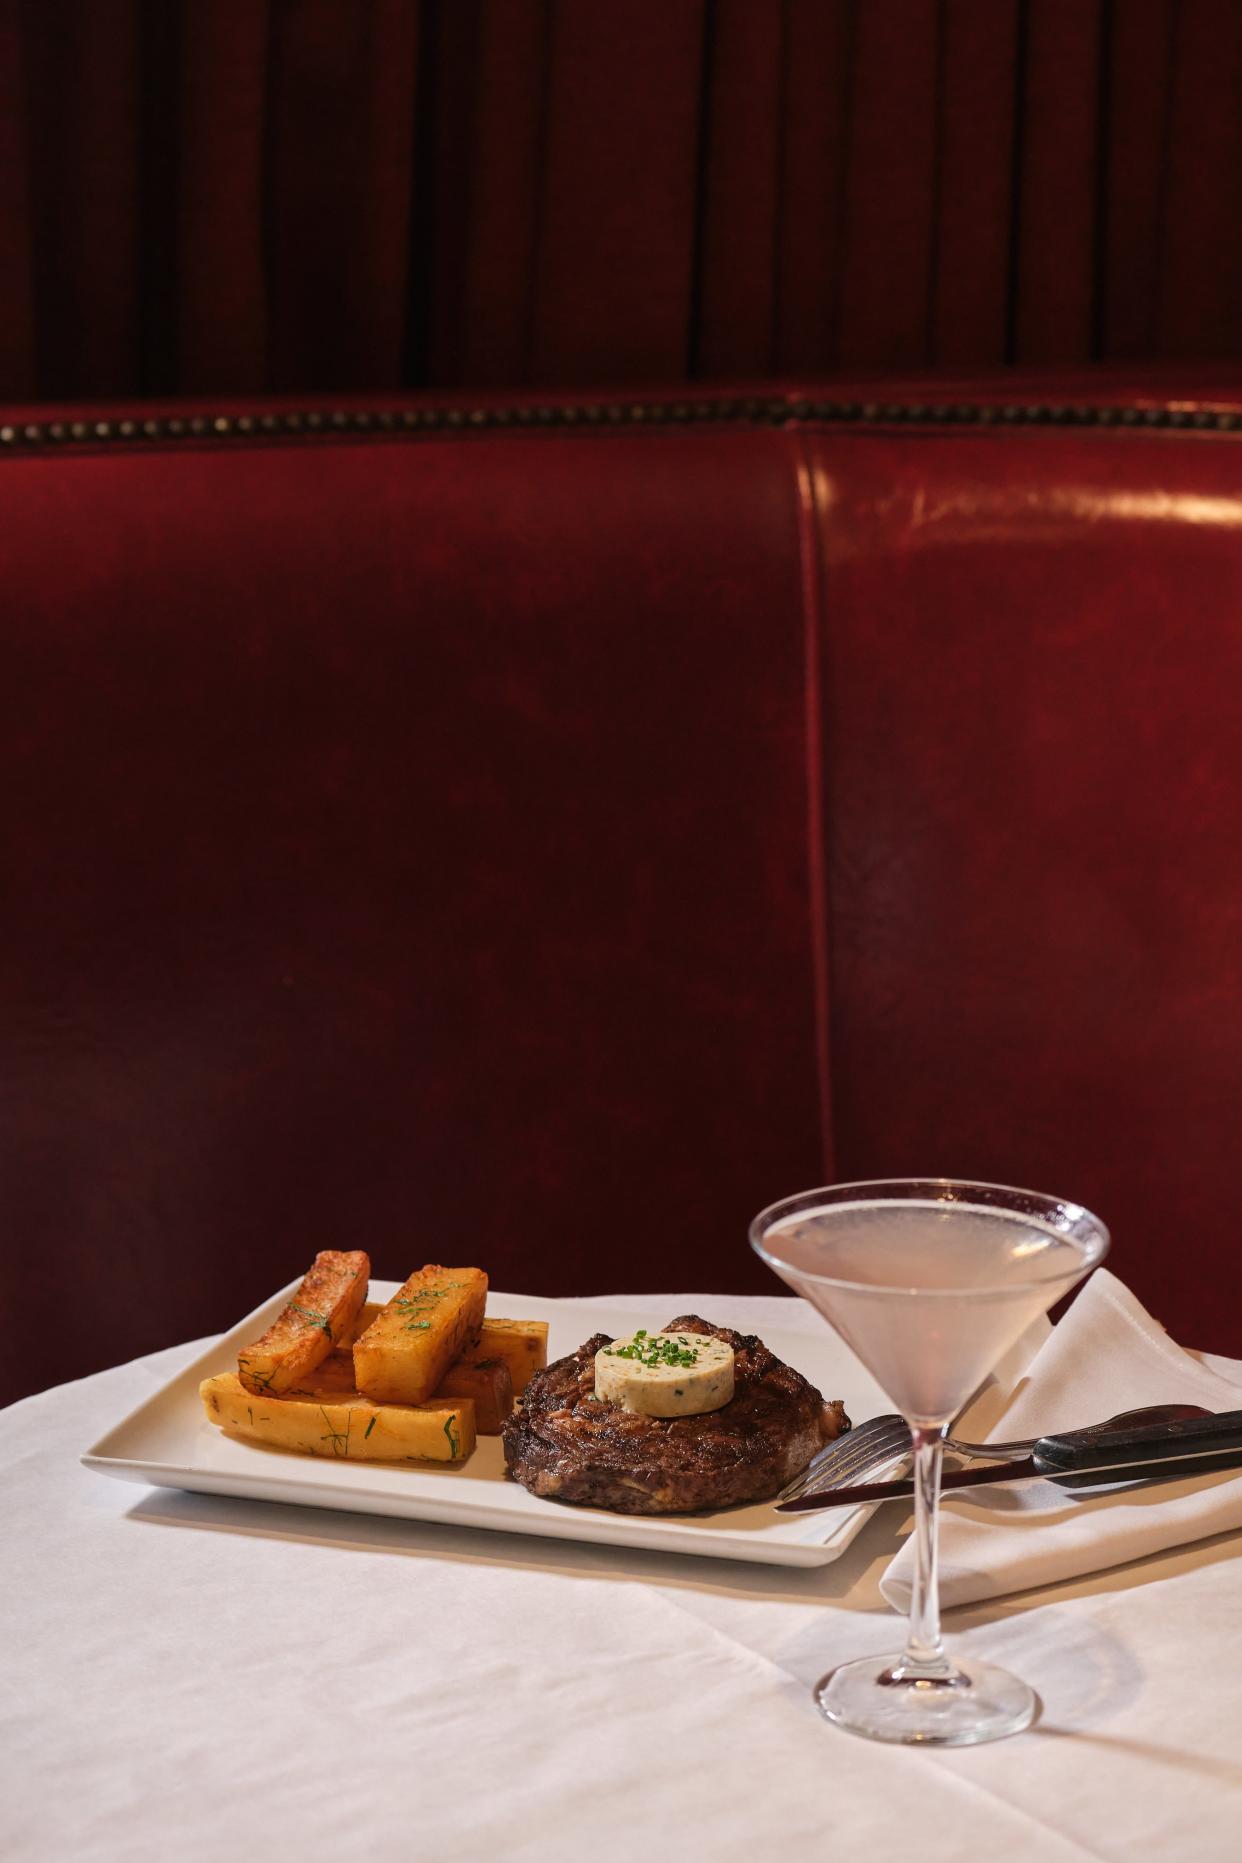 Steak frites are just one of many entree options at Pistache this Mother's Day.